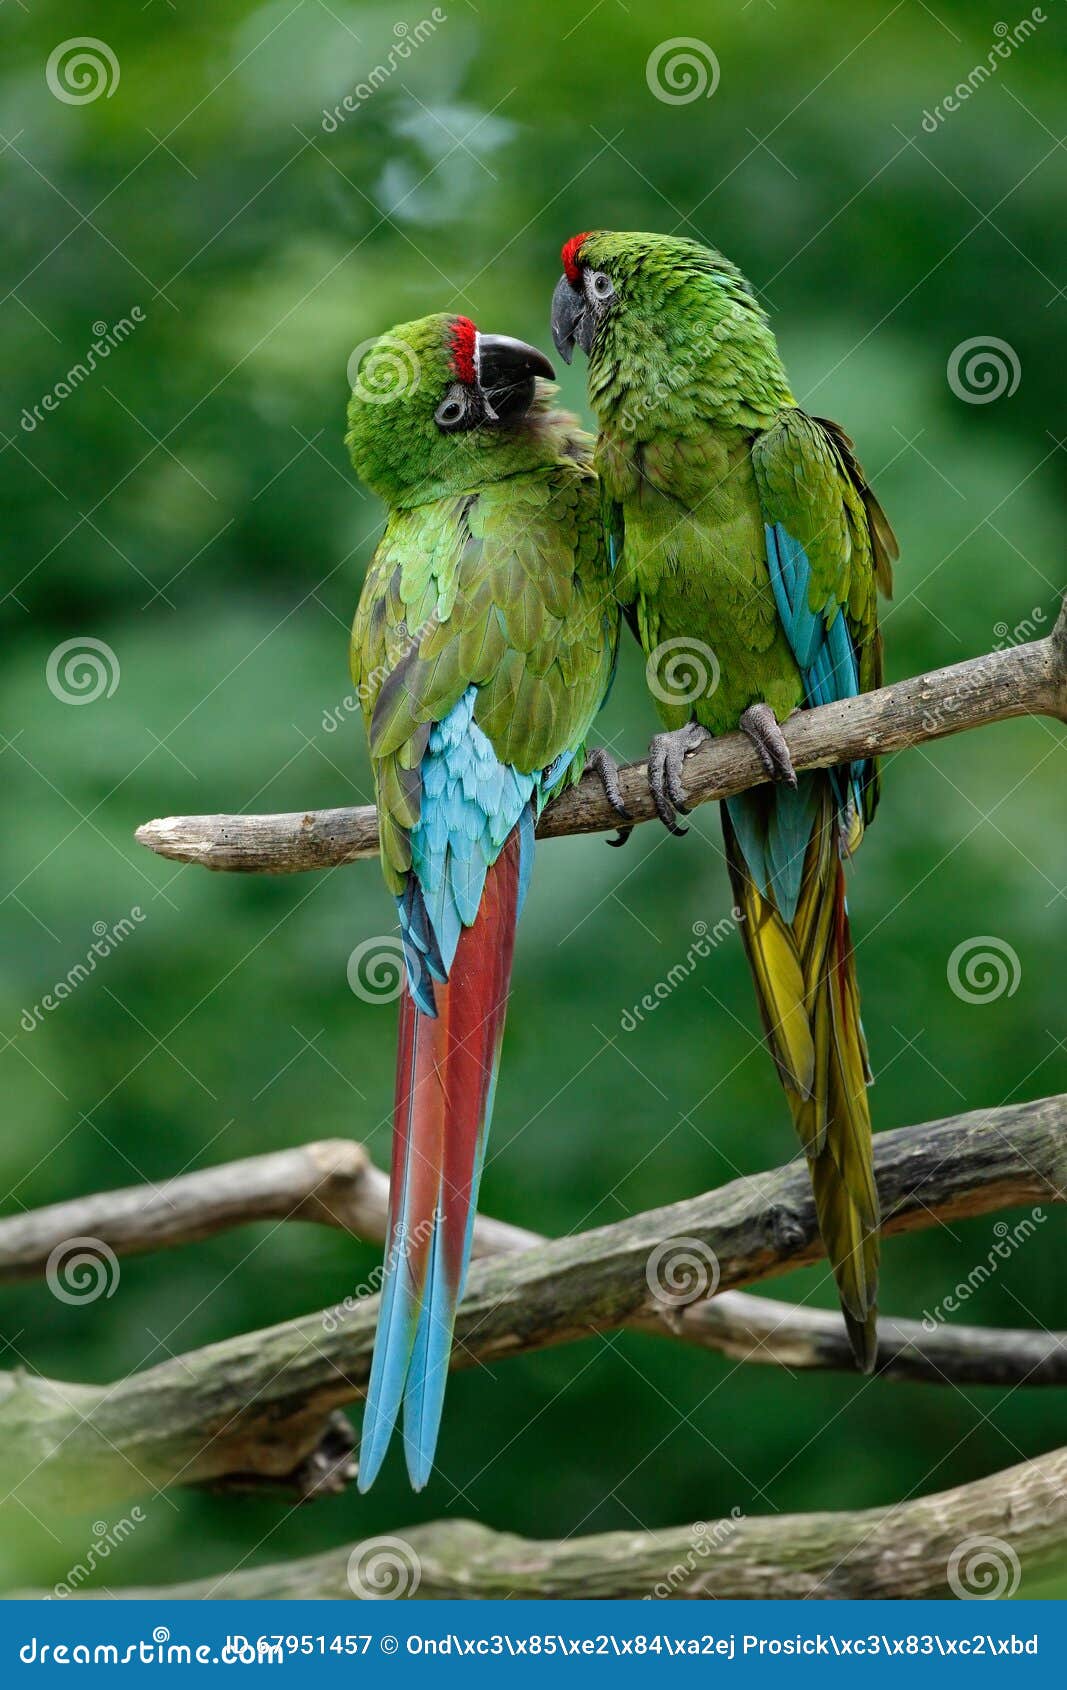 1,833 Parrot Photos - Free & Royalty-Free Stock from Dreamstime